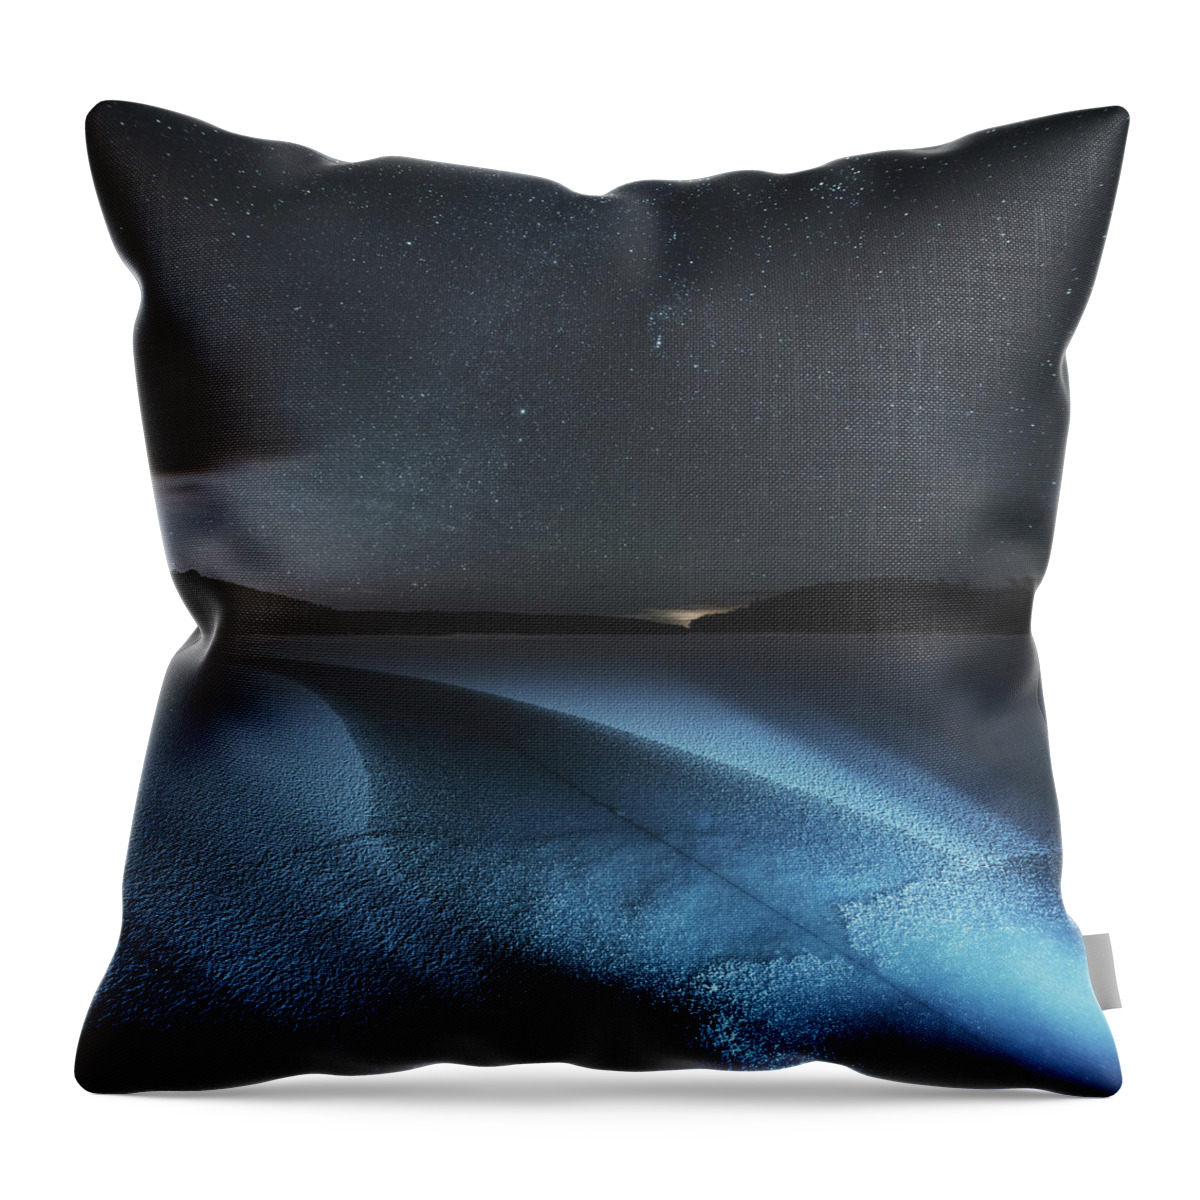 Scenics Throw Pillow featuring the photograph Fracture In Winter Lake by Shaunl